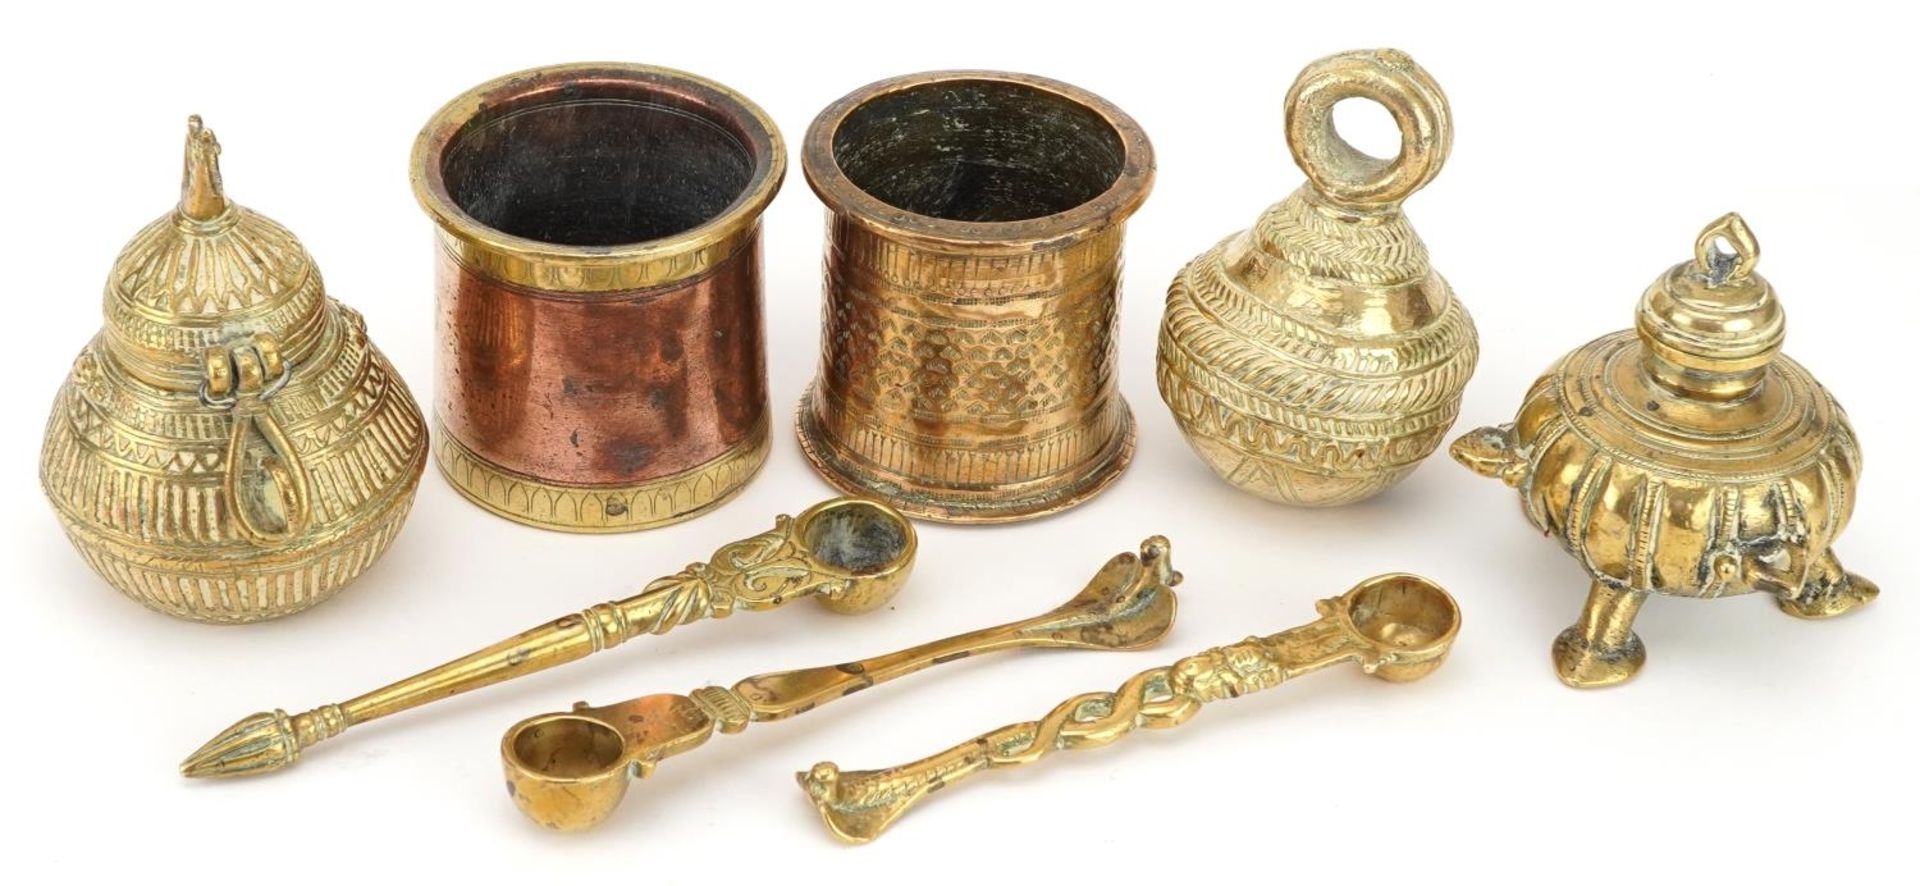 18th/19th and 20th century Indian metalware including three anointing spoons, Panch Patra holy water